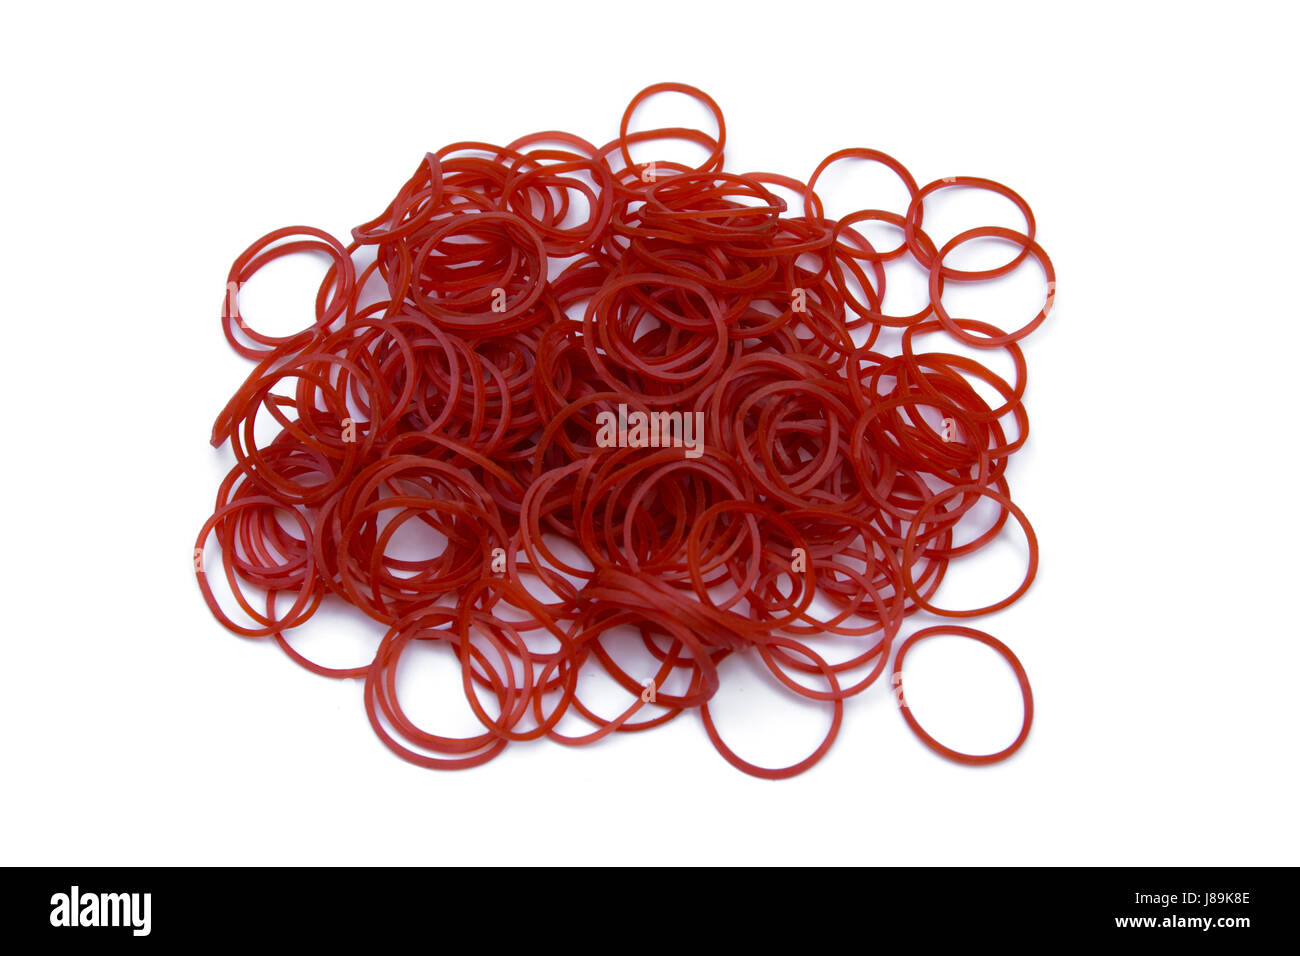 Round rubber bands Cut Out Stock Images & Pictures - Page 2 - Alamy